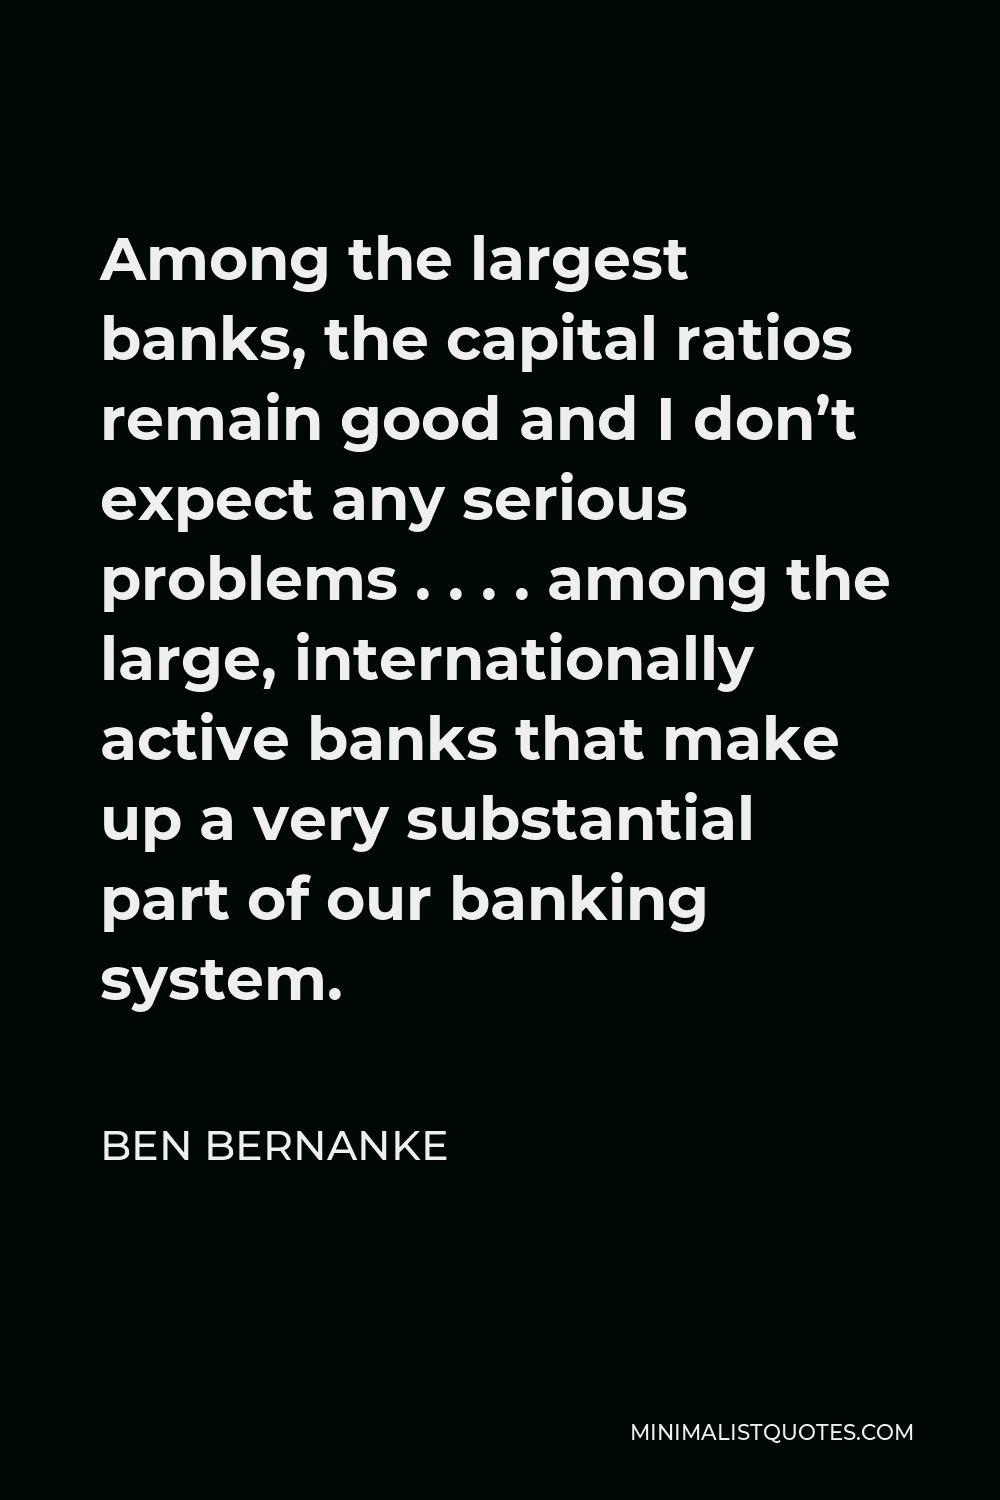 Ben Bernanke Quote - Among the largest banks, the capital ratios remain good and I don’t expect any serious problems . . . . among the large, internationally active banks that make up a very substantial part of our banking system.